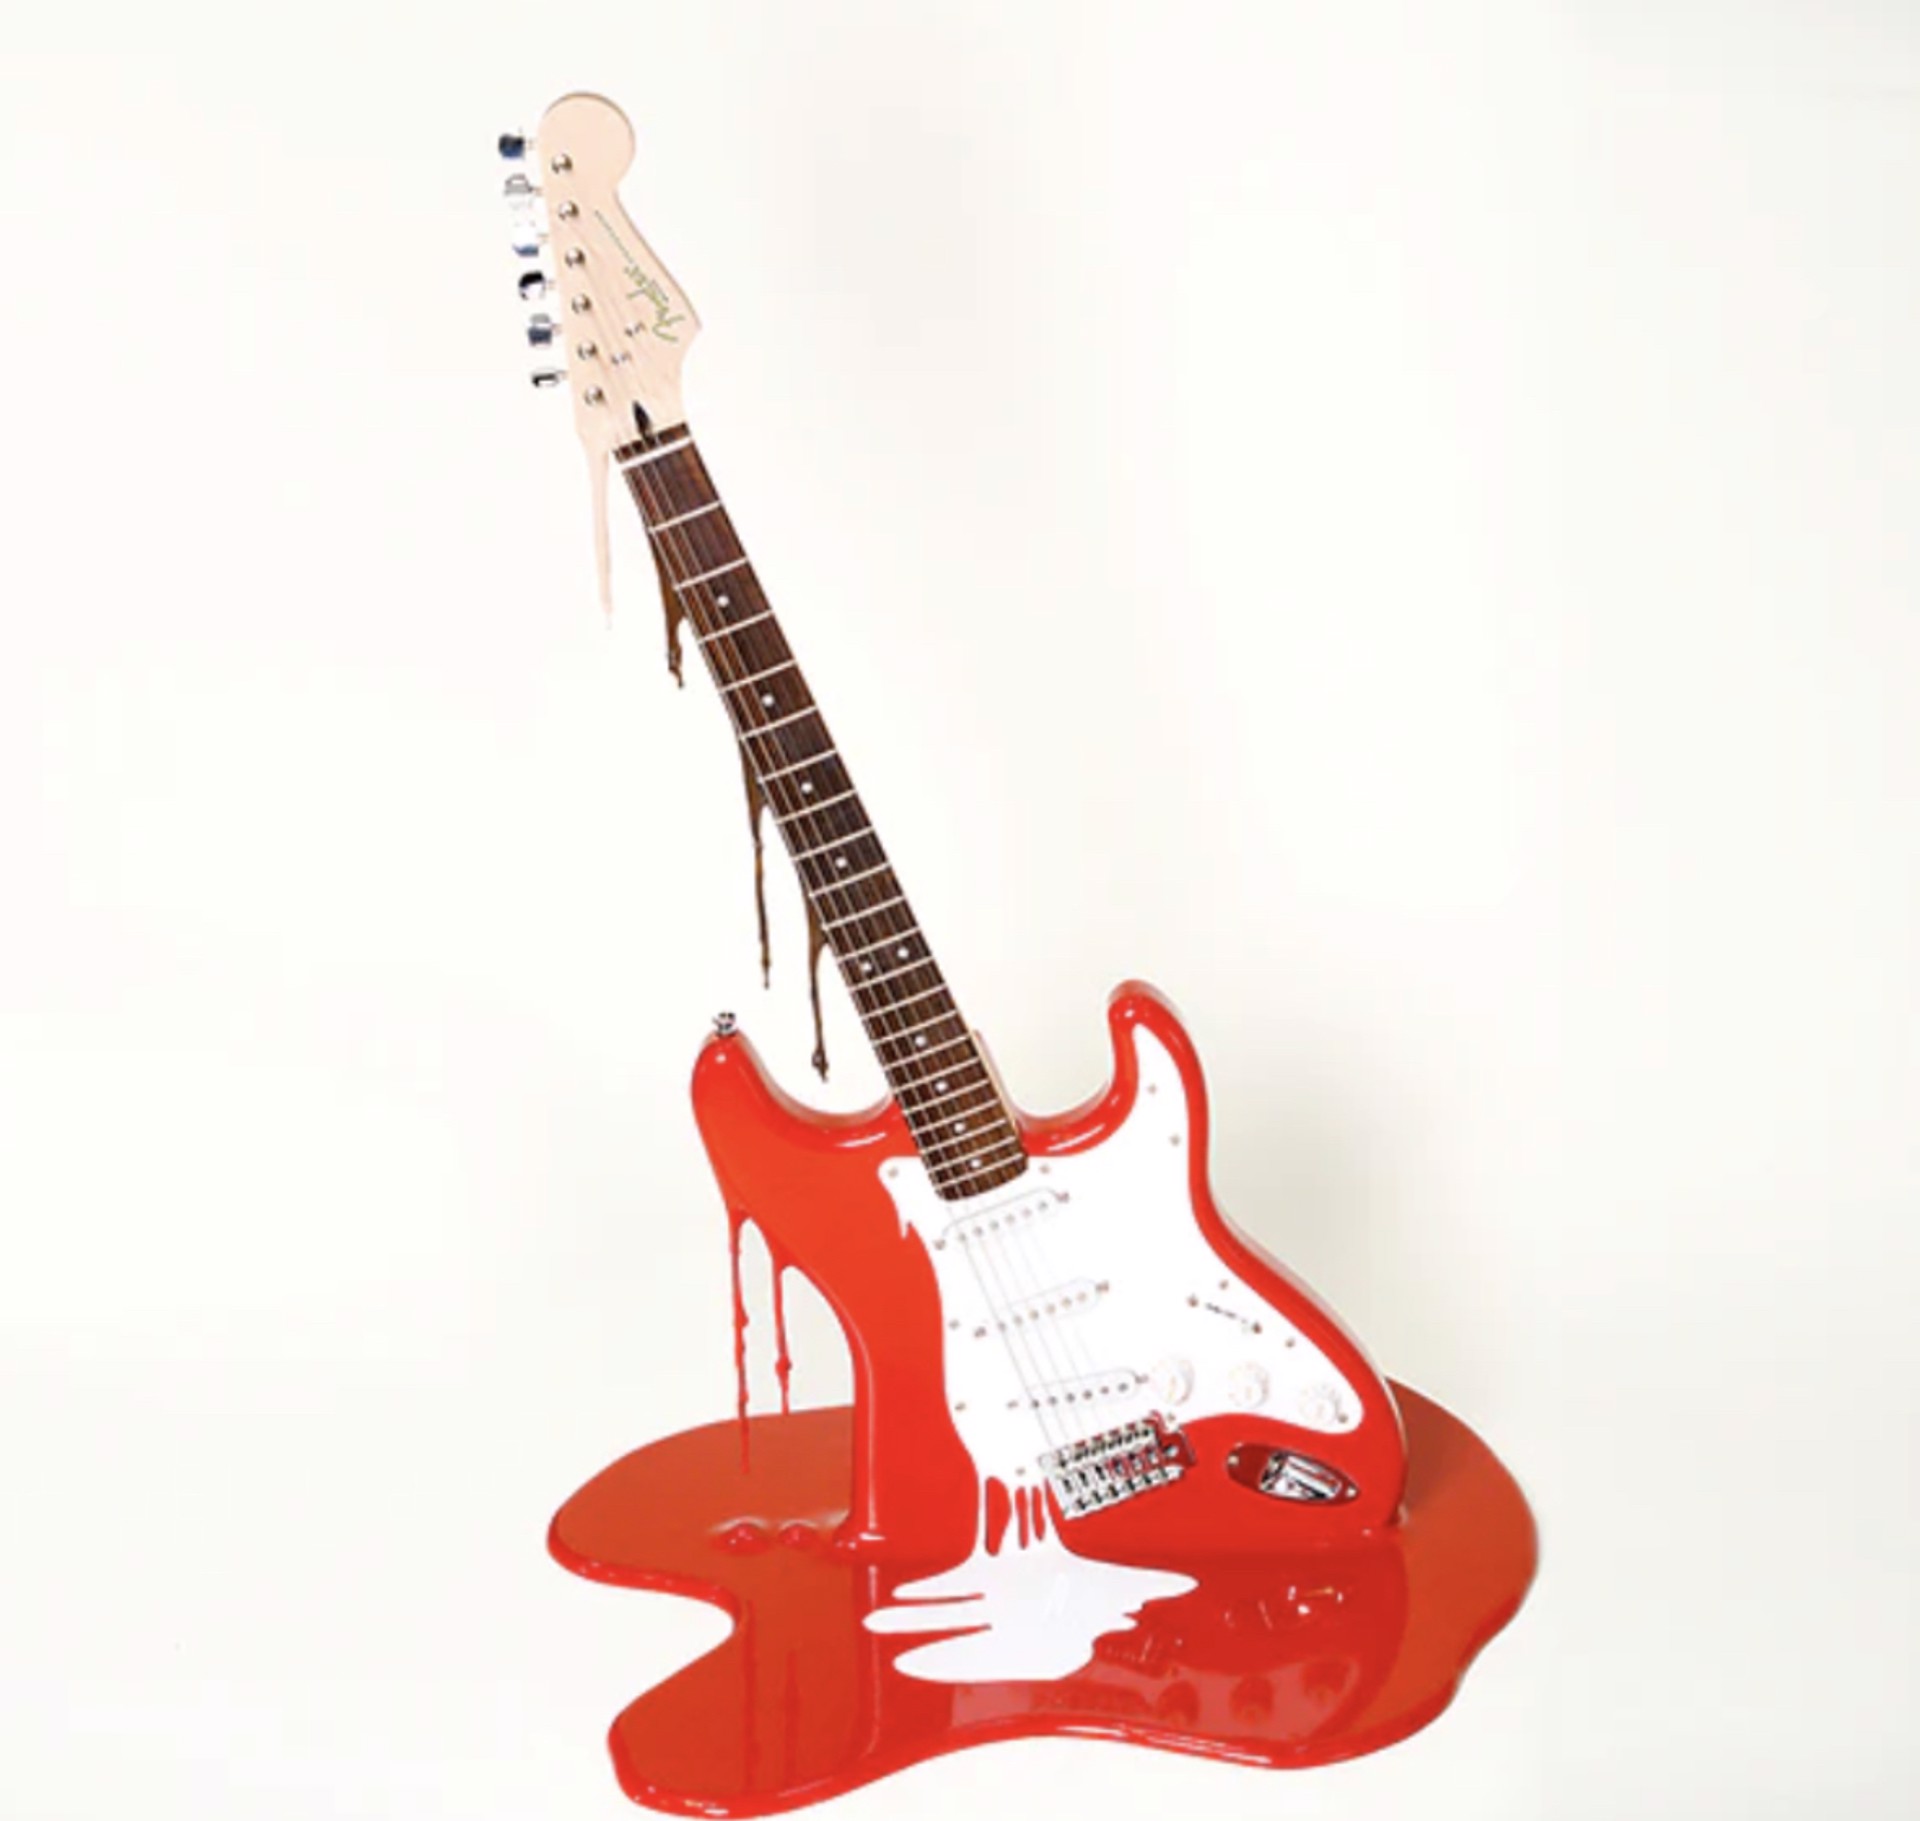 The Art of Noise (Cherry Red) by Plastic Jesus